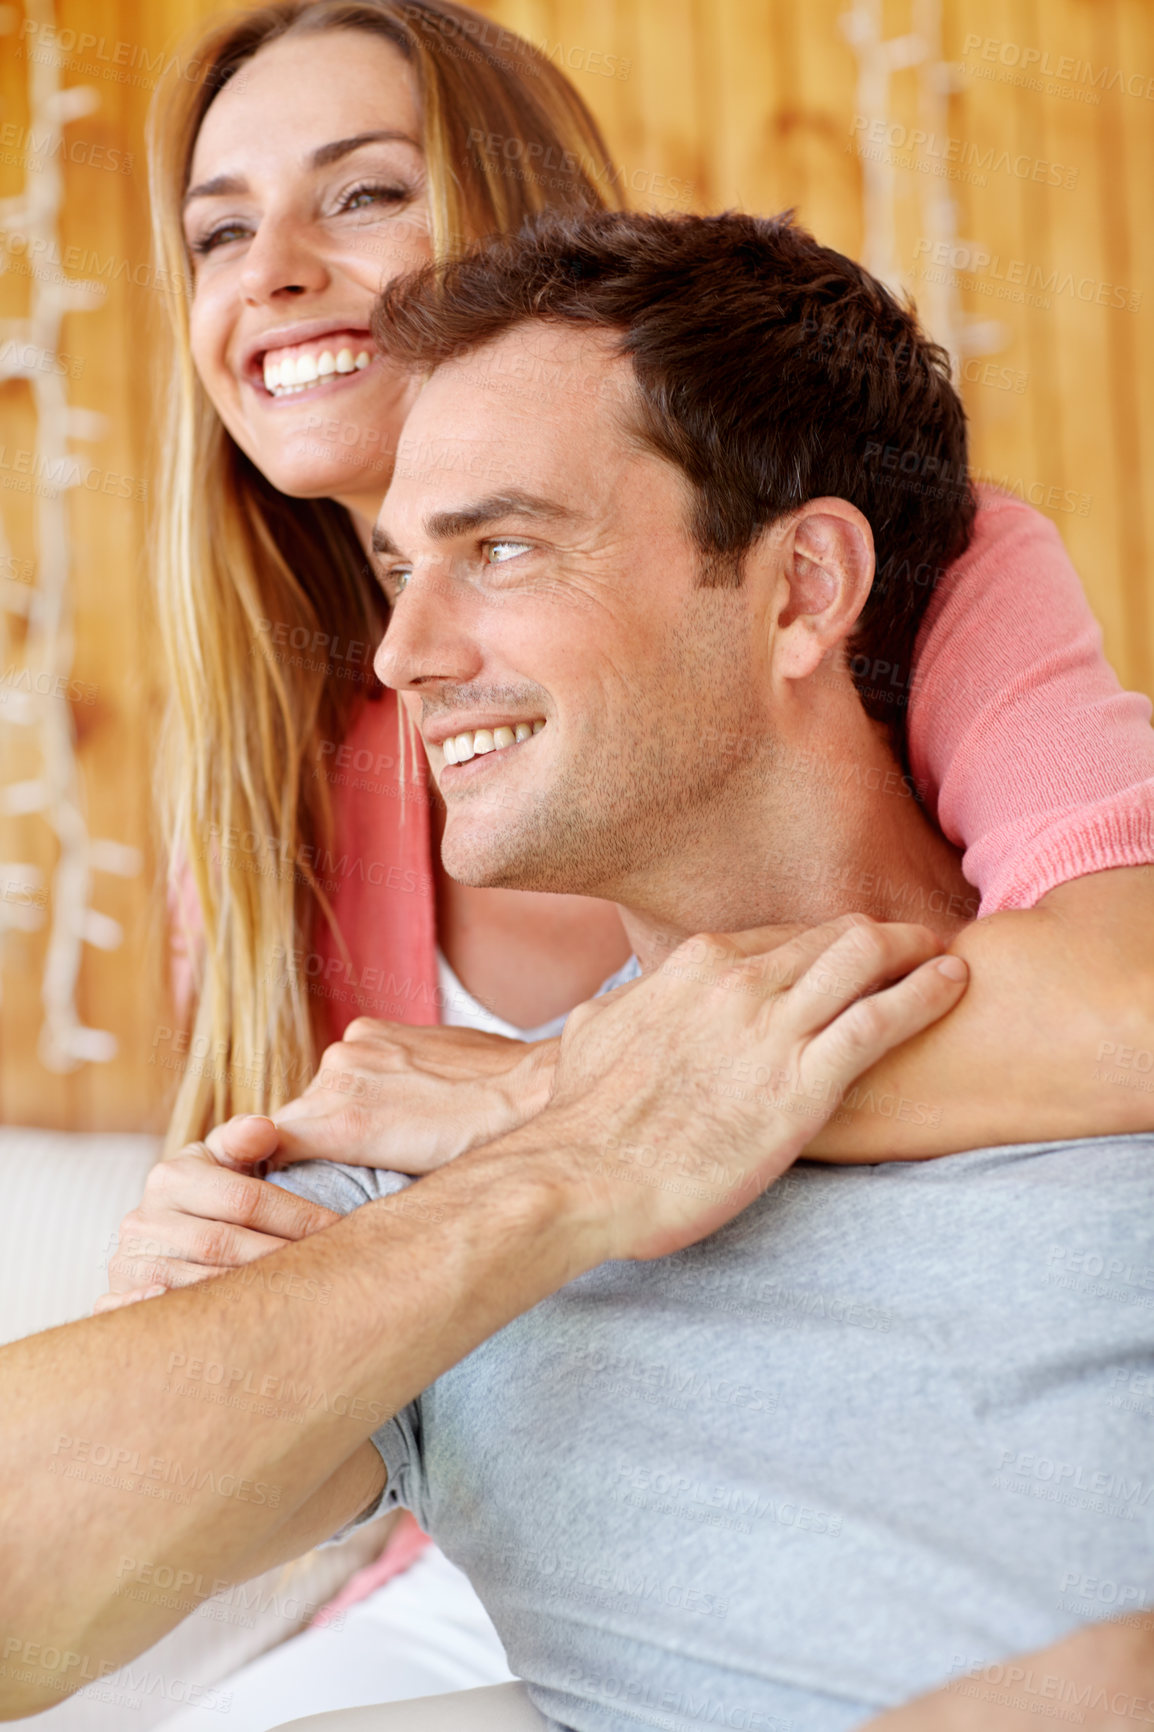 Buy stock photo A happy young couple sitting on the couch embracing lovingly